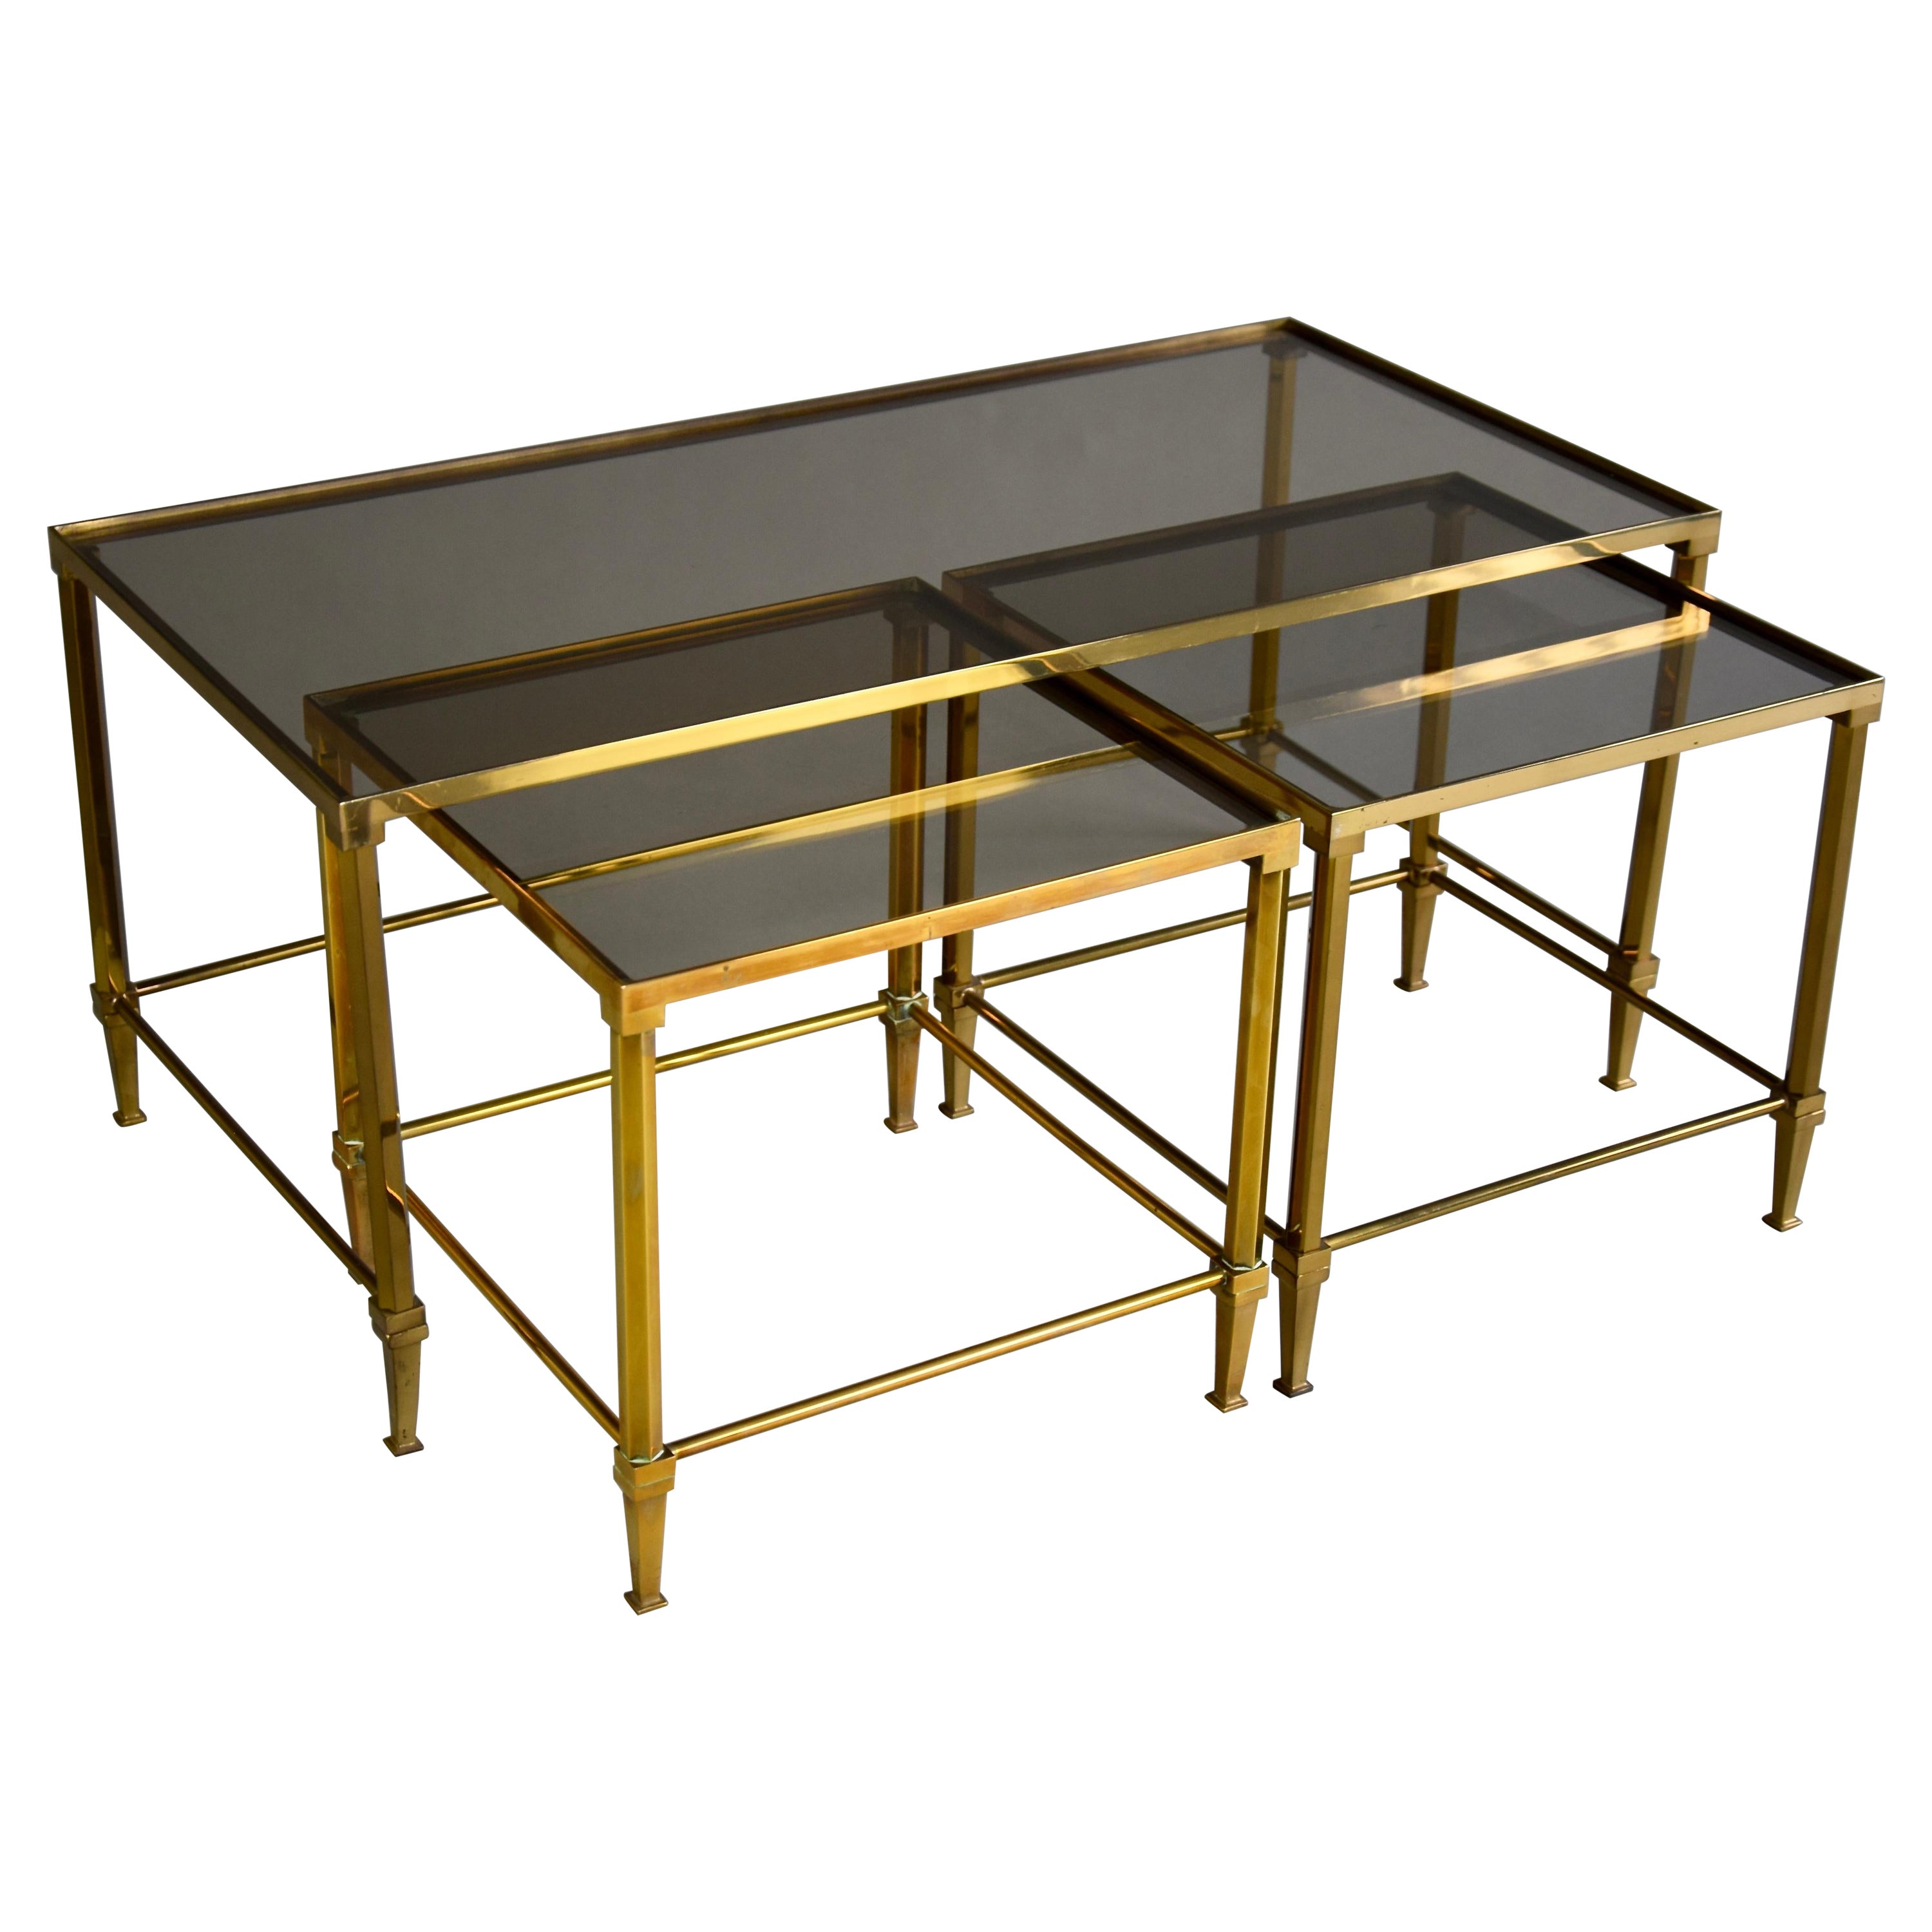 Mid-century Modern Neoclassical Brass Nesting Tables Attributed to Maison Jansen